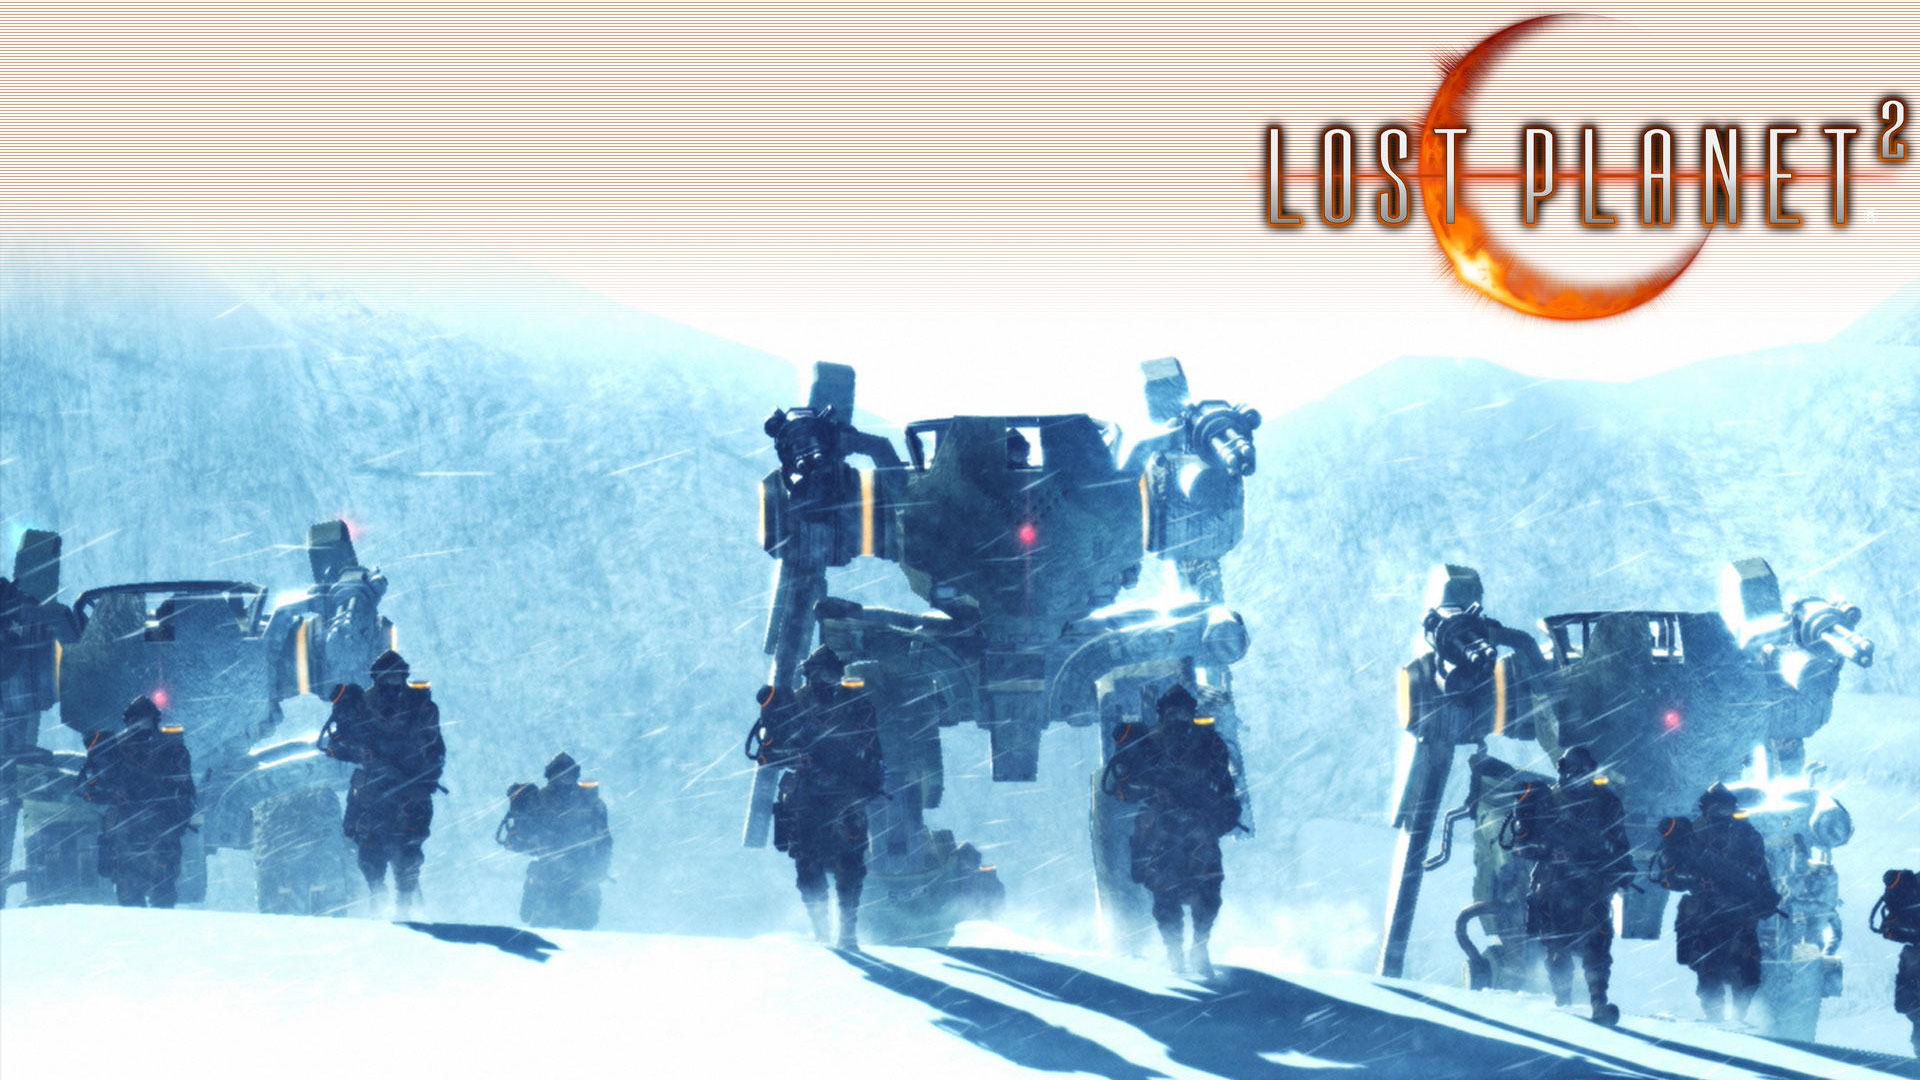  wallpapers of Lost Planet 2 You are downloading Lost Planet 2